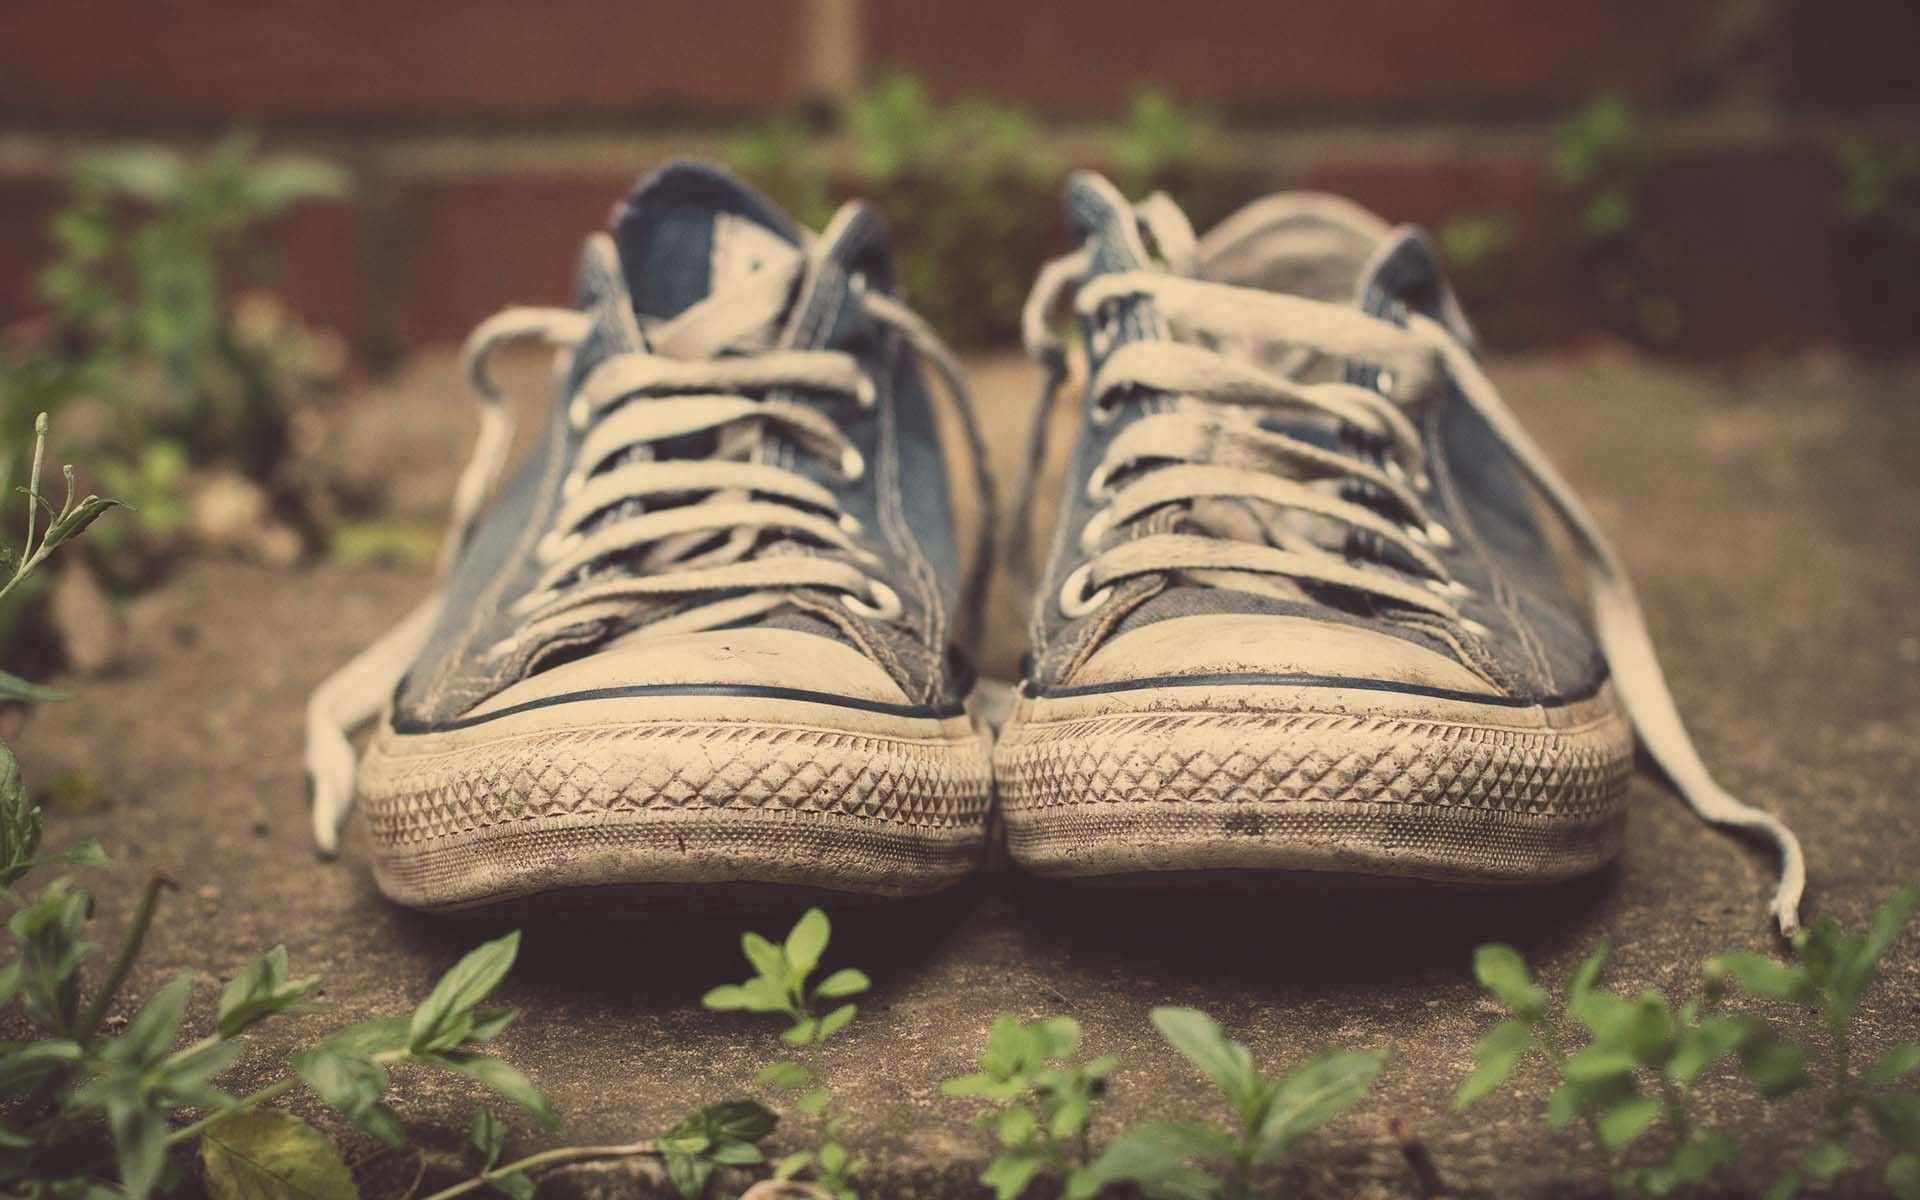 shoes, miscellanea, old, sports, miscellaneous, sneakers, mud, dirt, footwear, laces, shoelaces